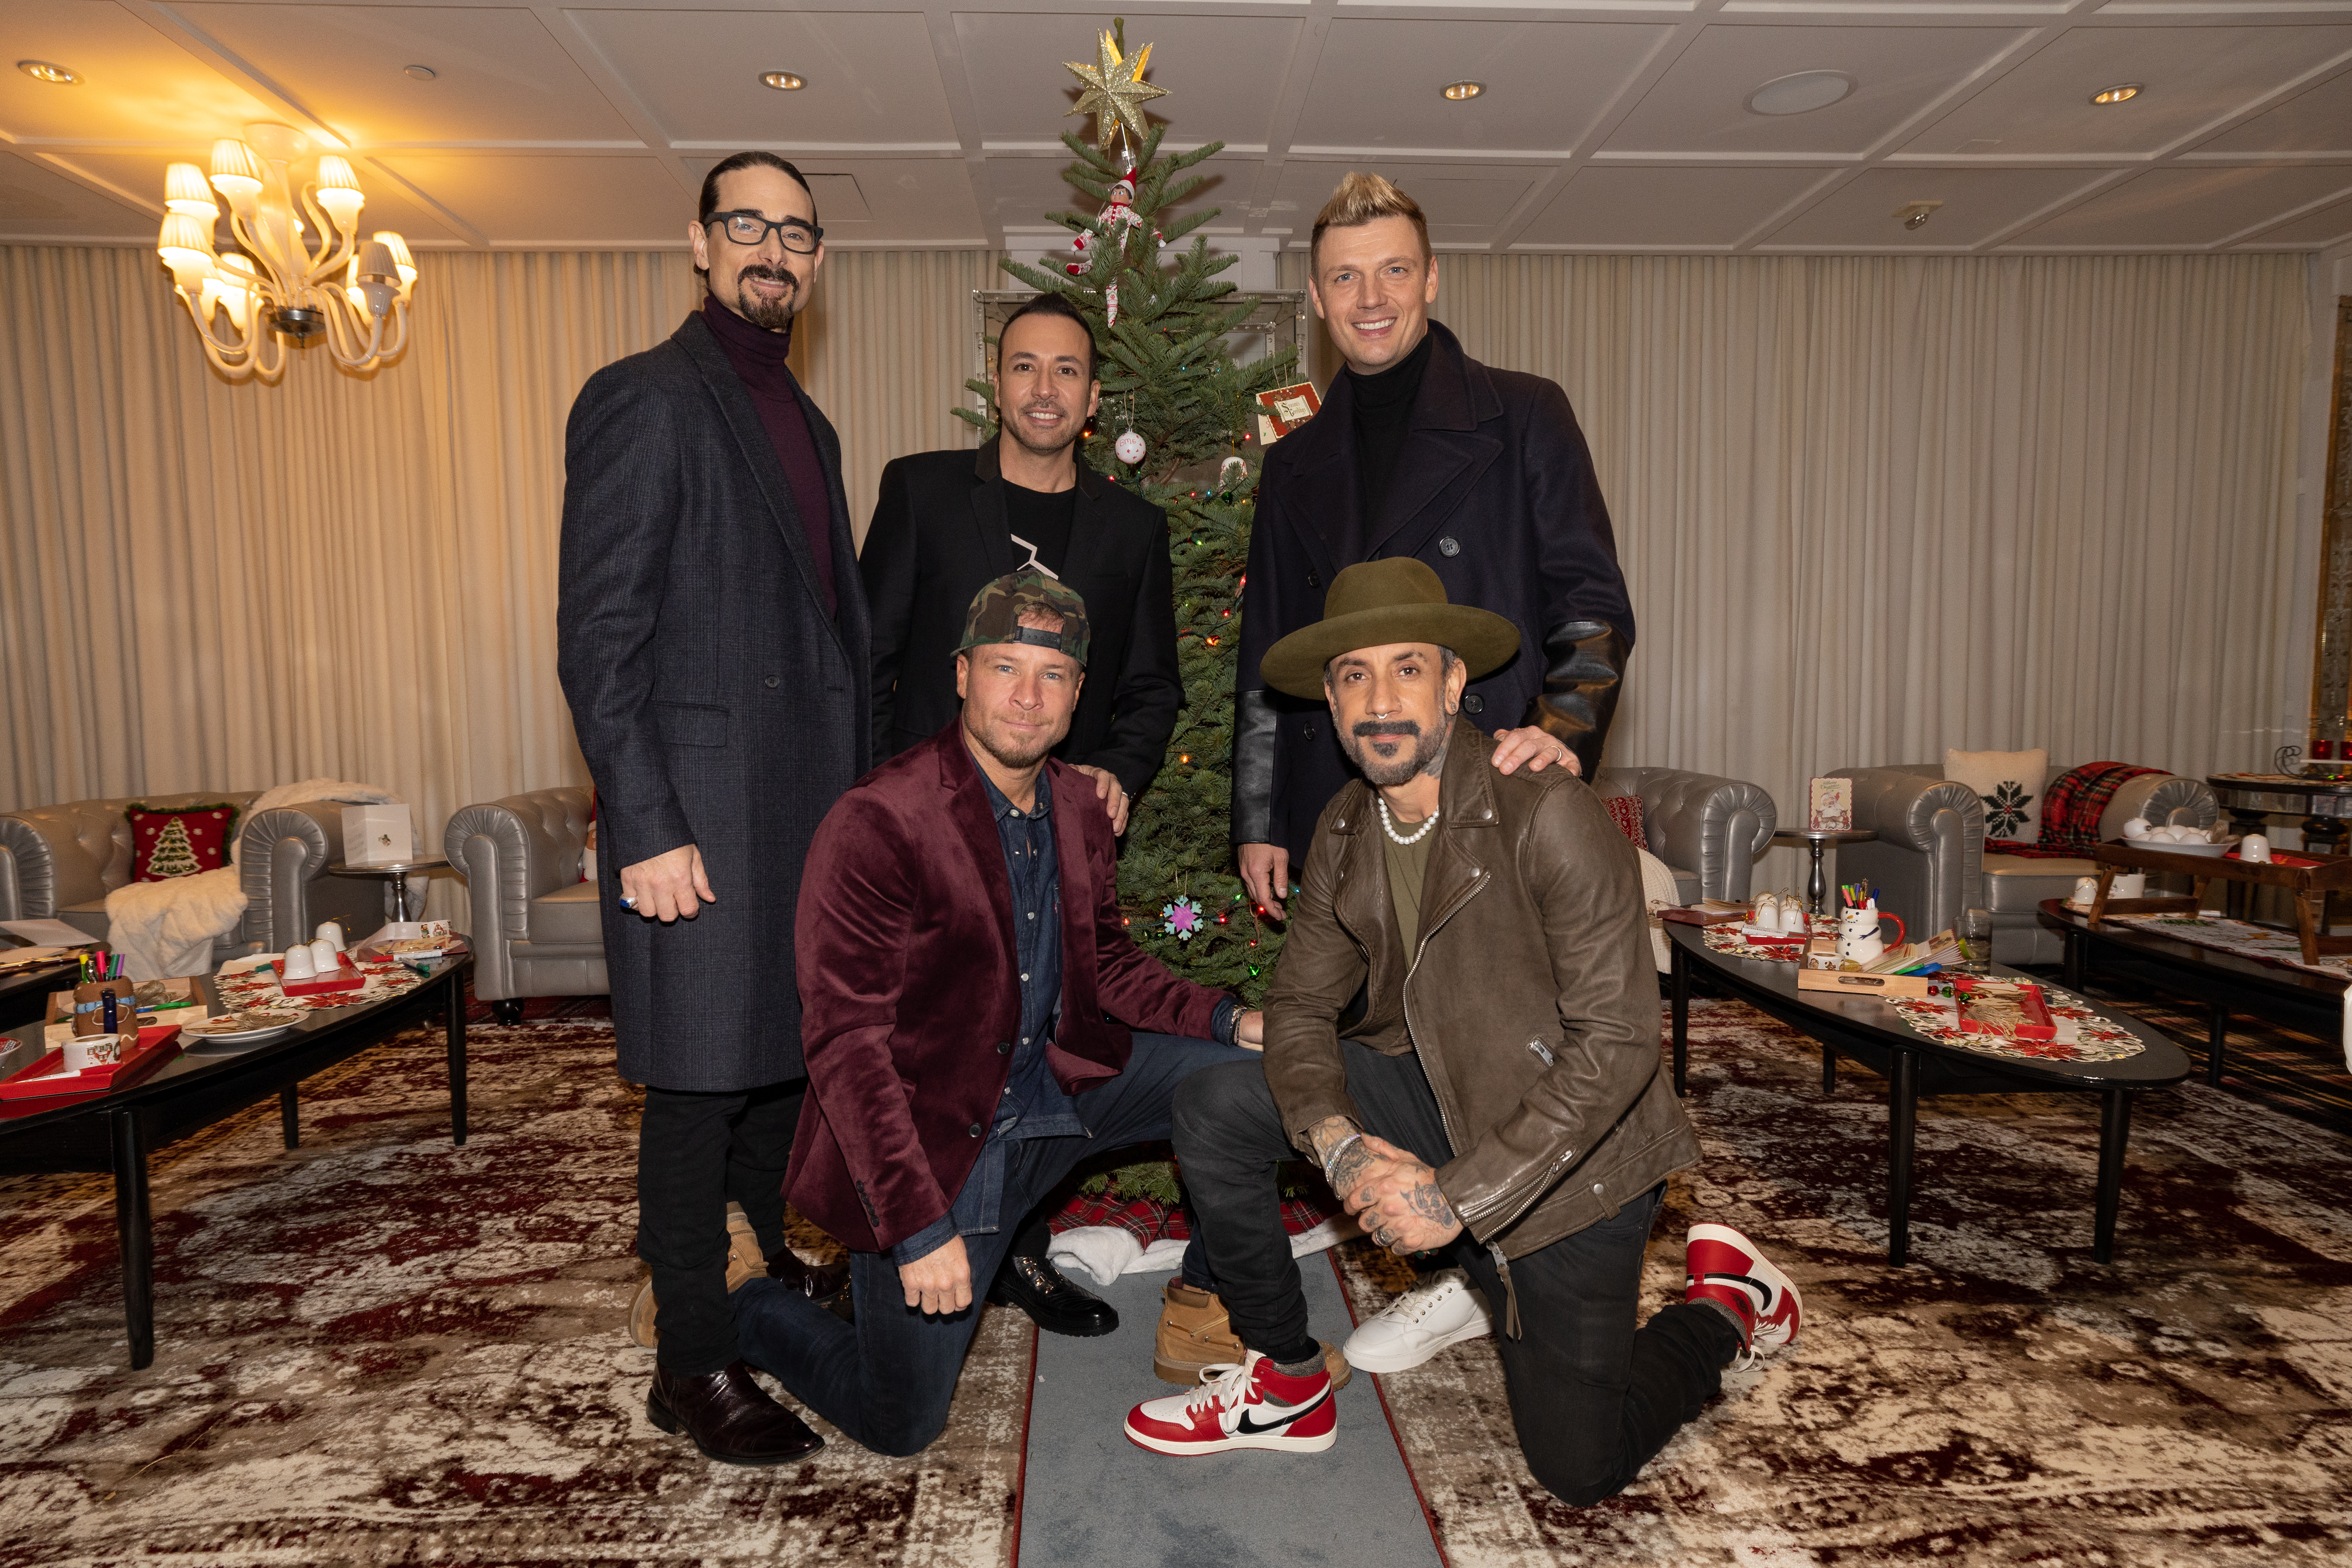 Kevin Richardson, Howie Dorough, Nick Carter, Brian Littrell, and AJ McLean of the Backstreet Boys promoting their 2022 Christmas album